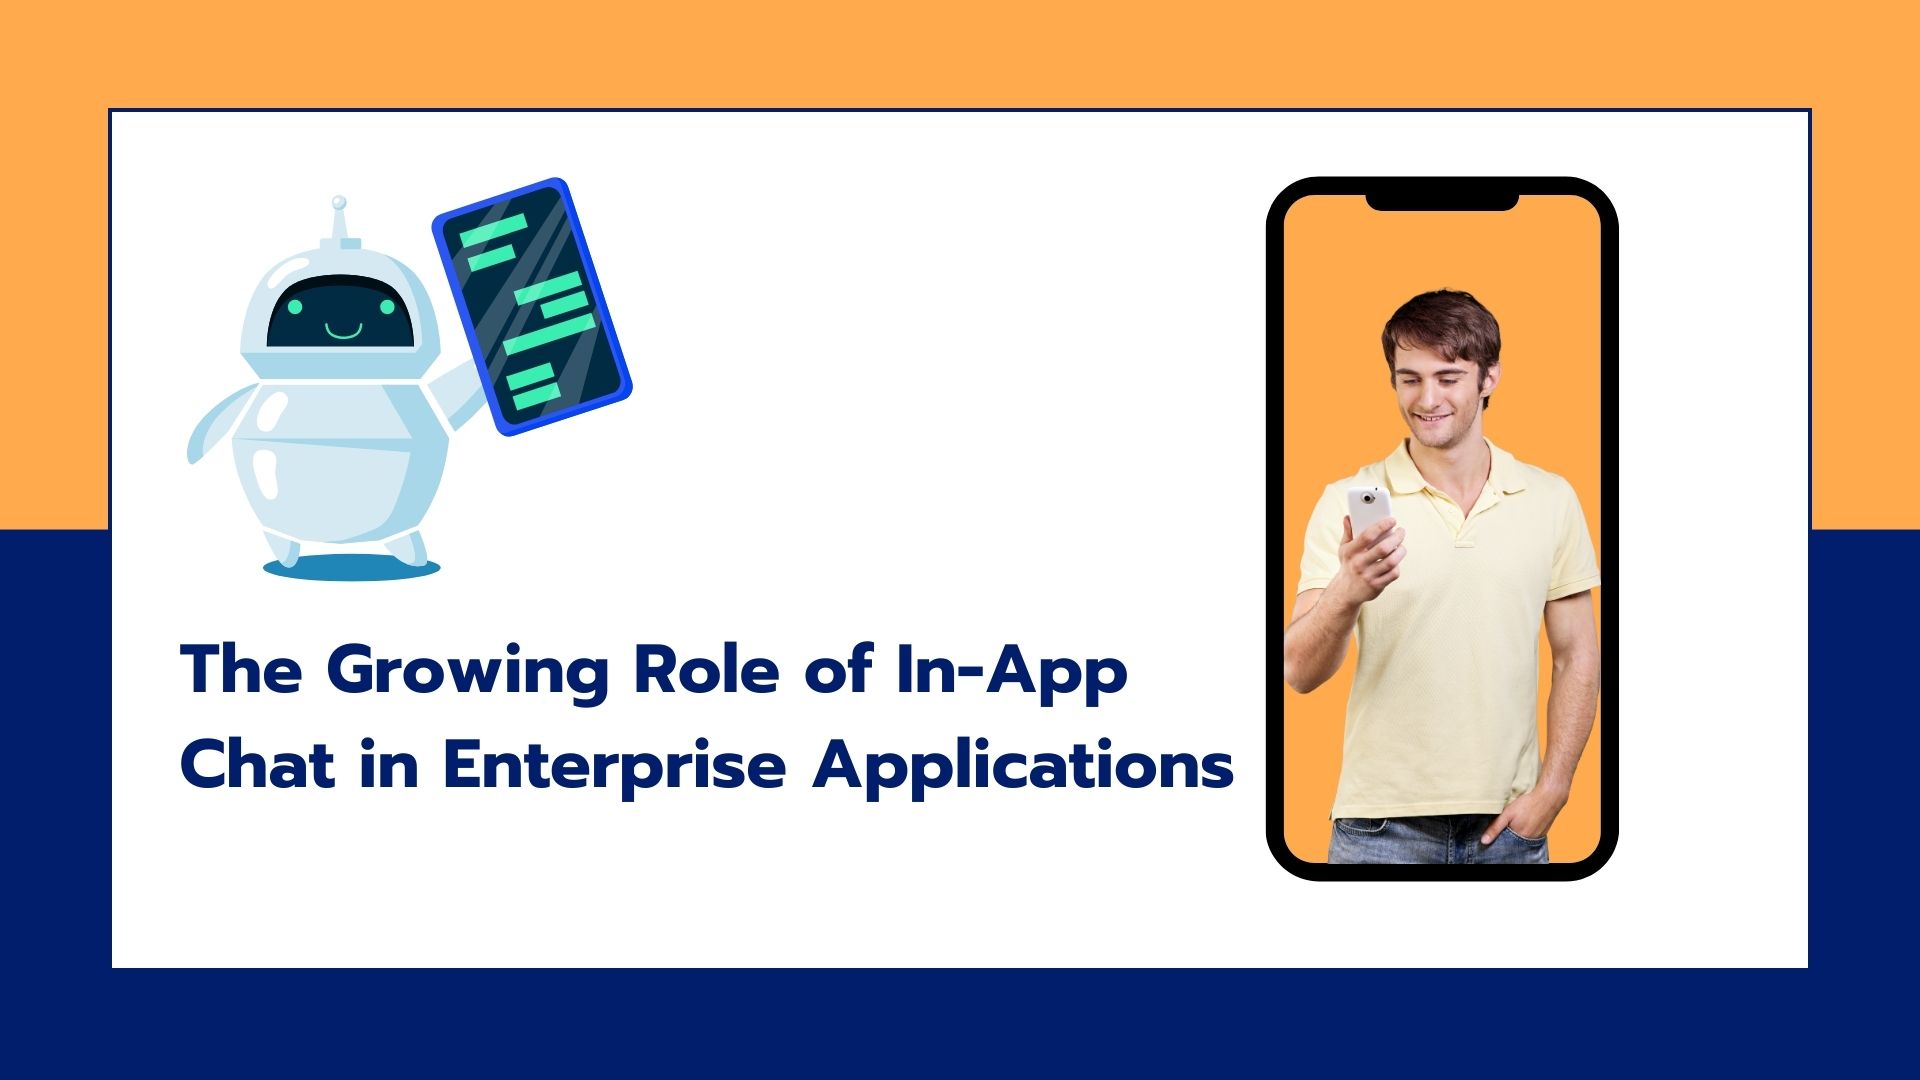 The Growing Role of In-App Chat in Enterprise Applications